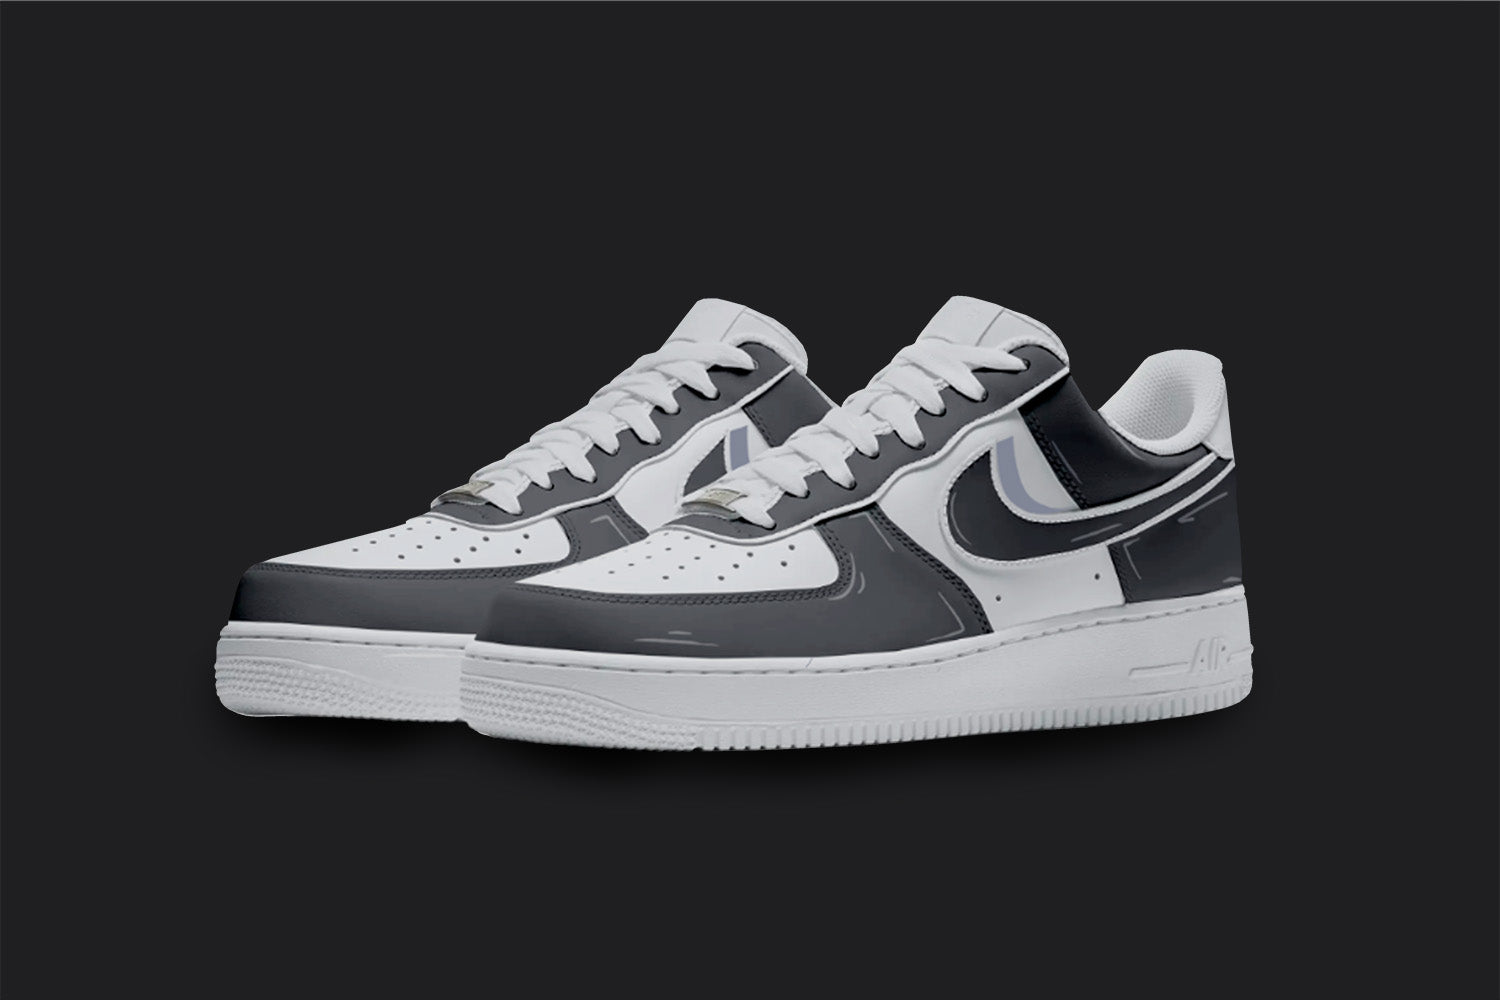 The image is of a Custom Nike Air force 1 sneaker pair on a blank black background. The white custom sneakers have a black cartoon styled design. 